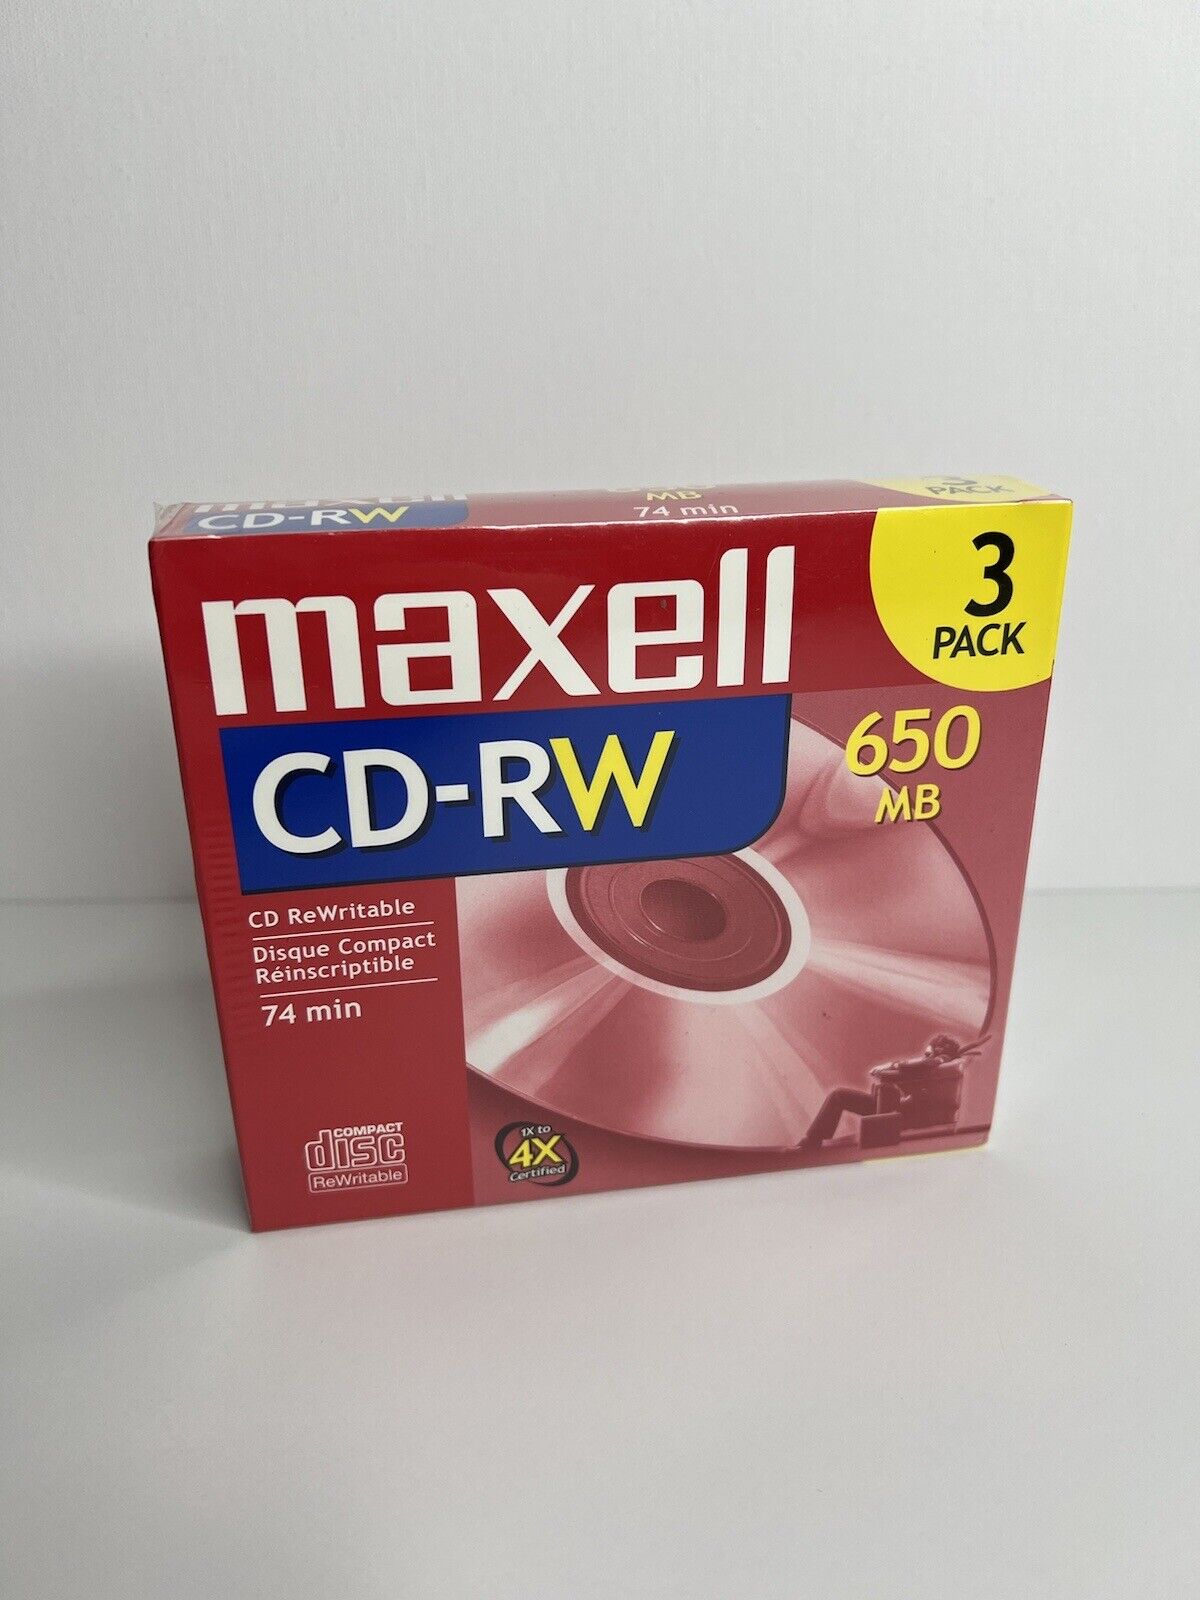 Maxell CD-RW 3 pack New Sealed